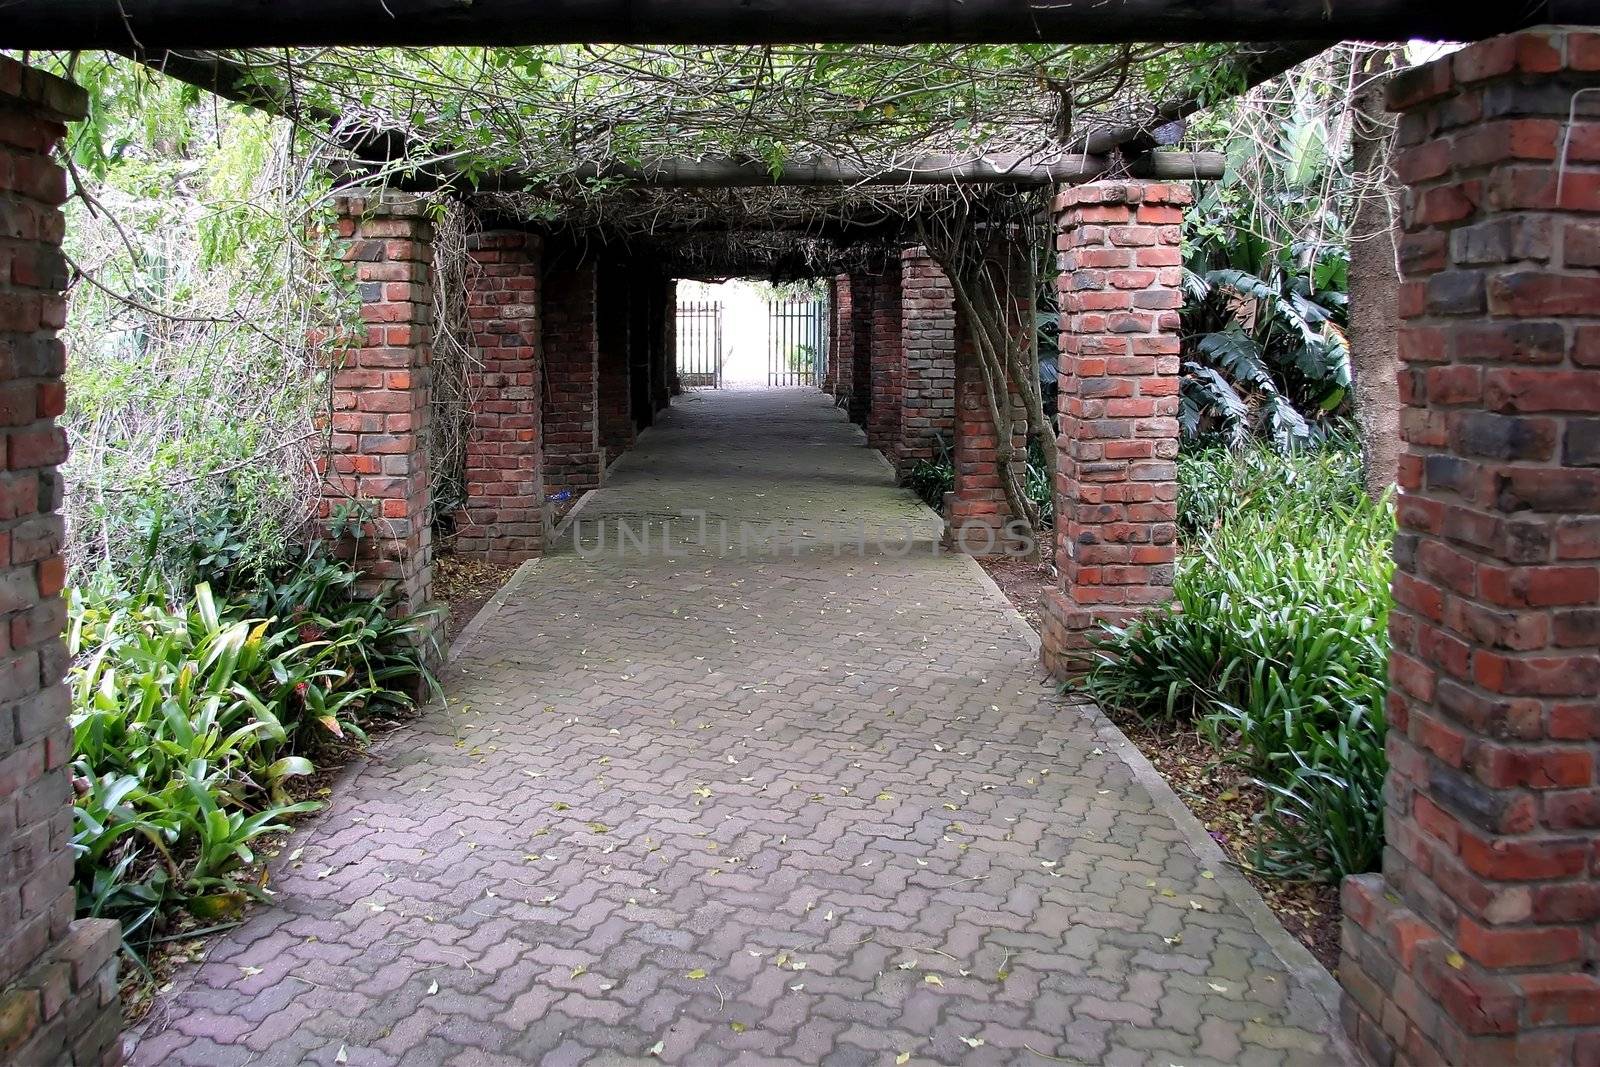 Foliage covered walkway with gates and bright light at the end